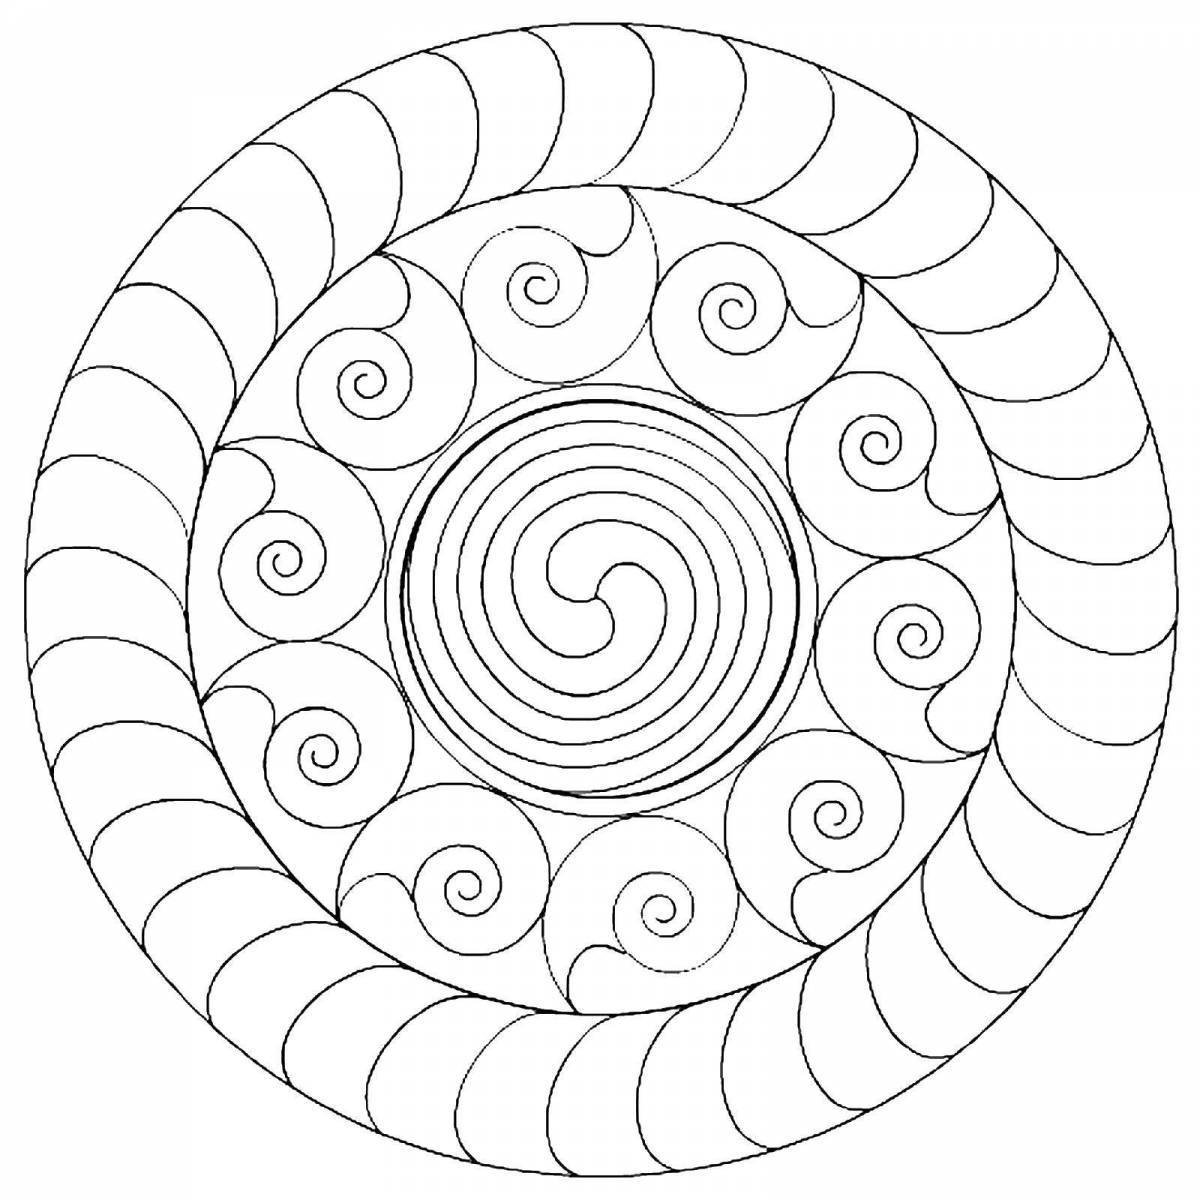 Delightful coloring in a circle in a spiral